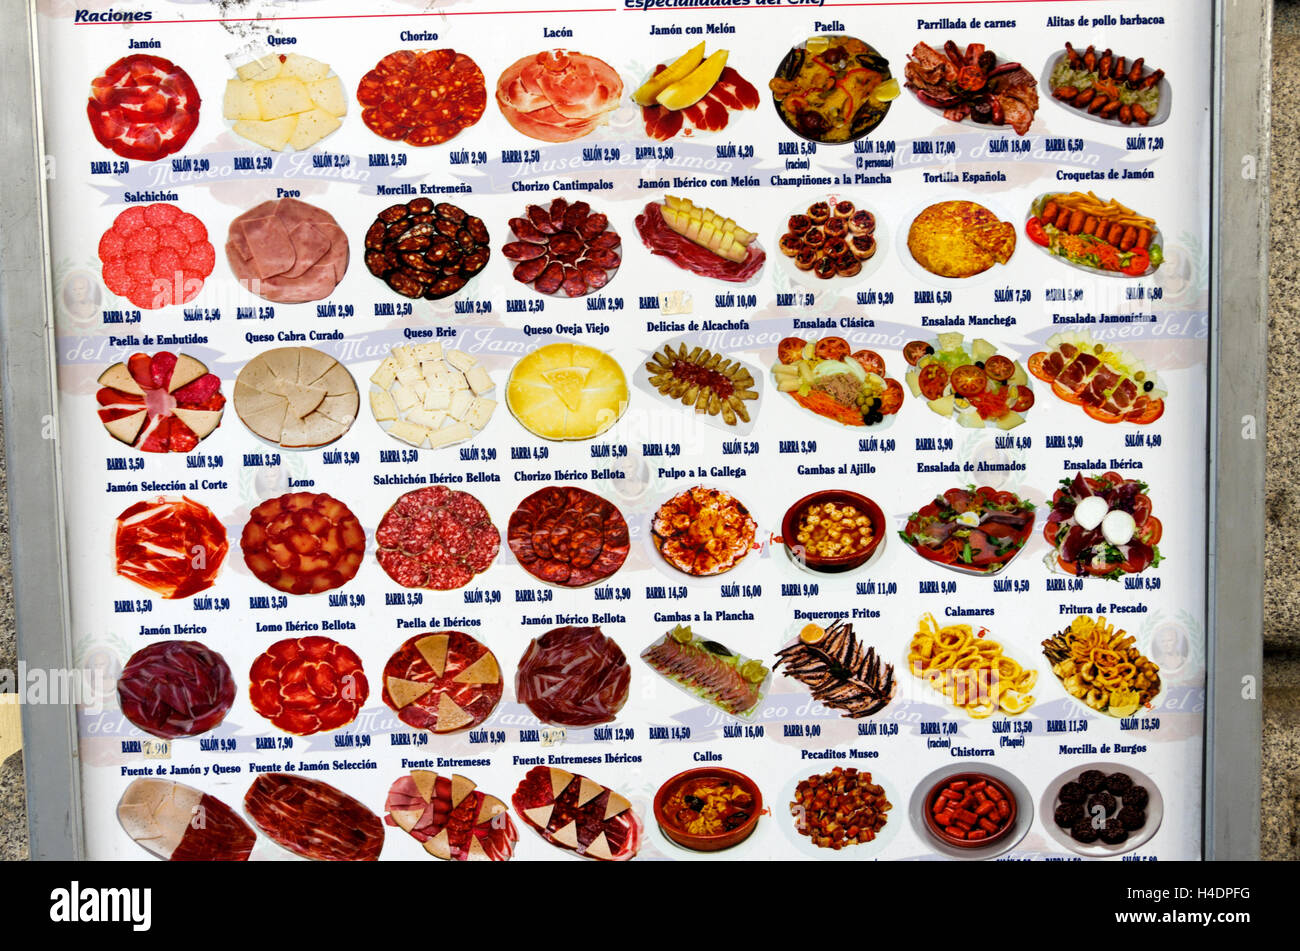 Menu display board showing all the tapas available at the bar-restaurant. Stock Photo